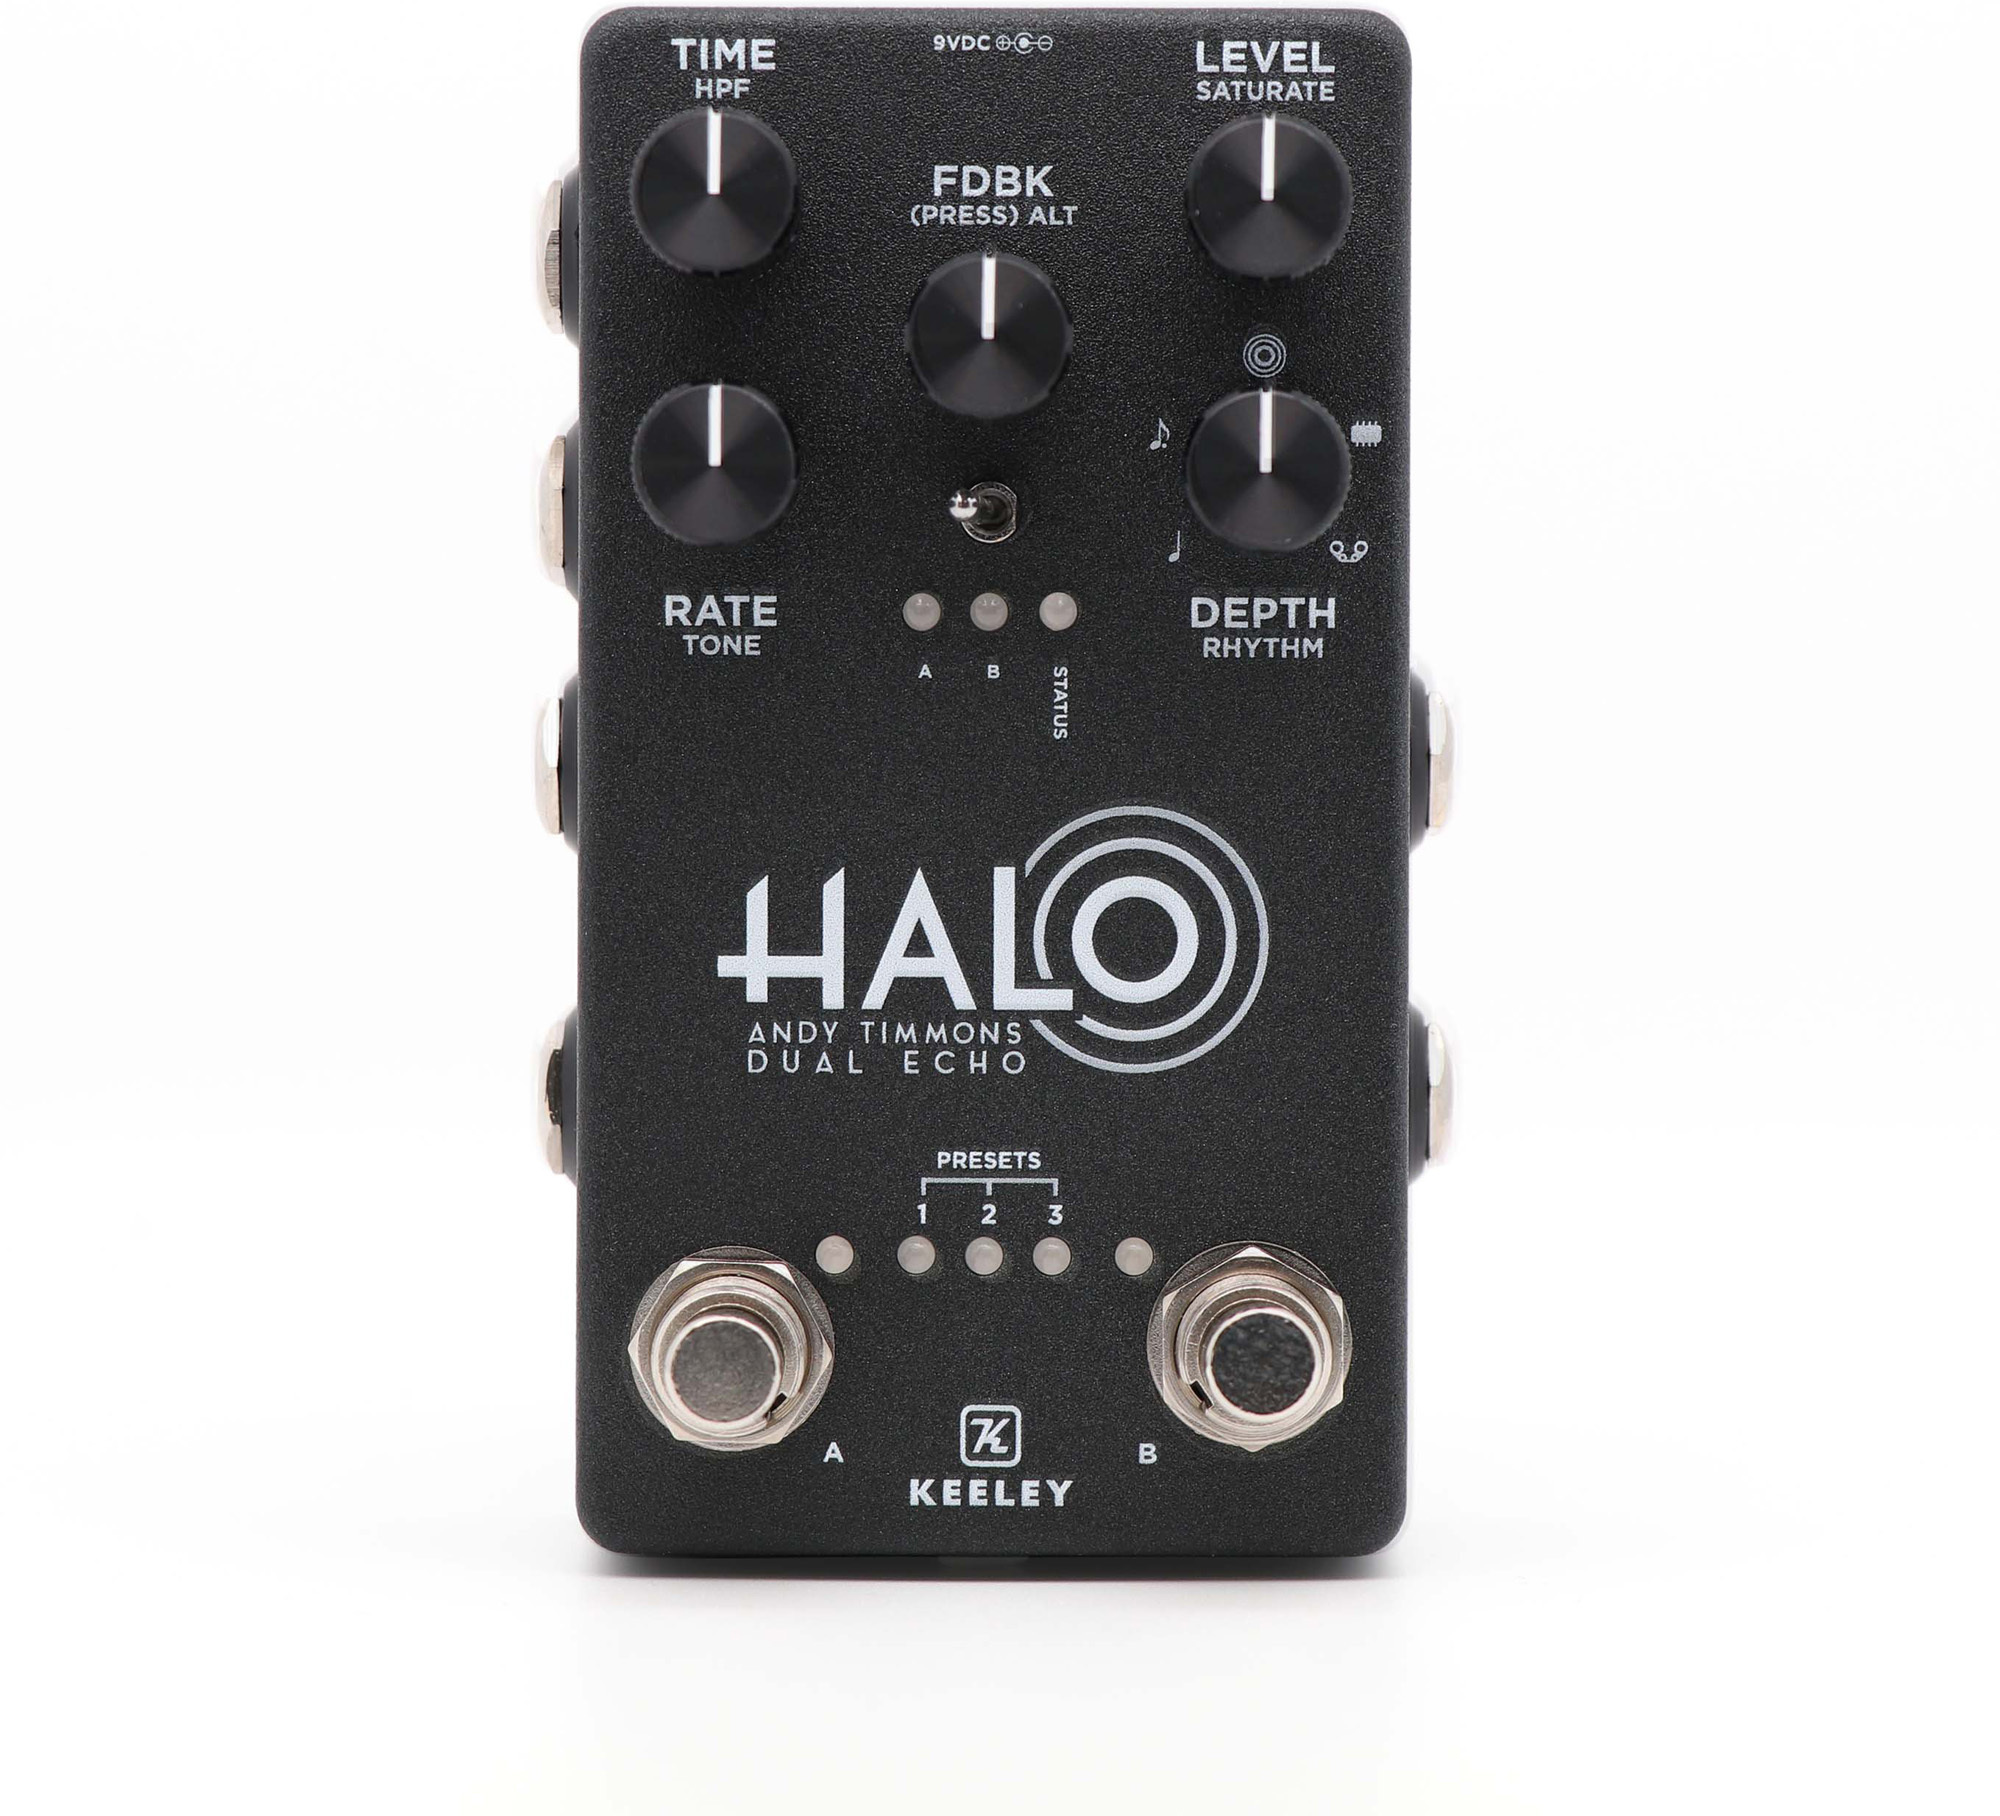 Keeley  Electronics Halo Dual Echo Andy Timmons Signature - Reverb/delay/echo effect pedaal - Main picture